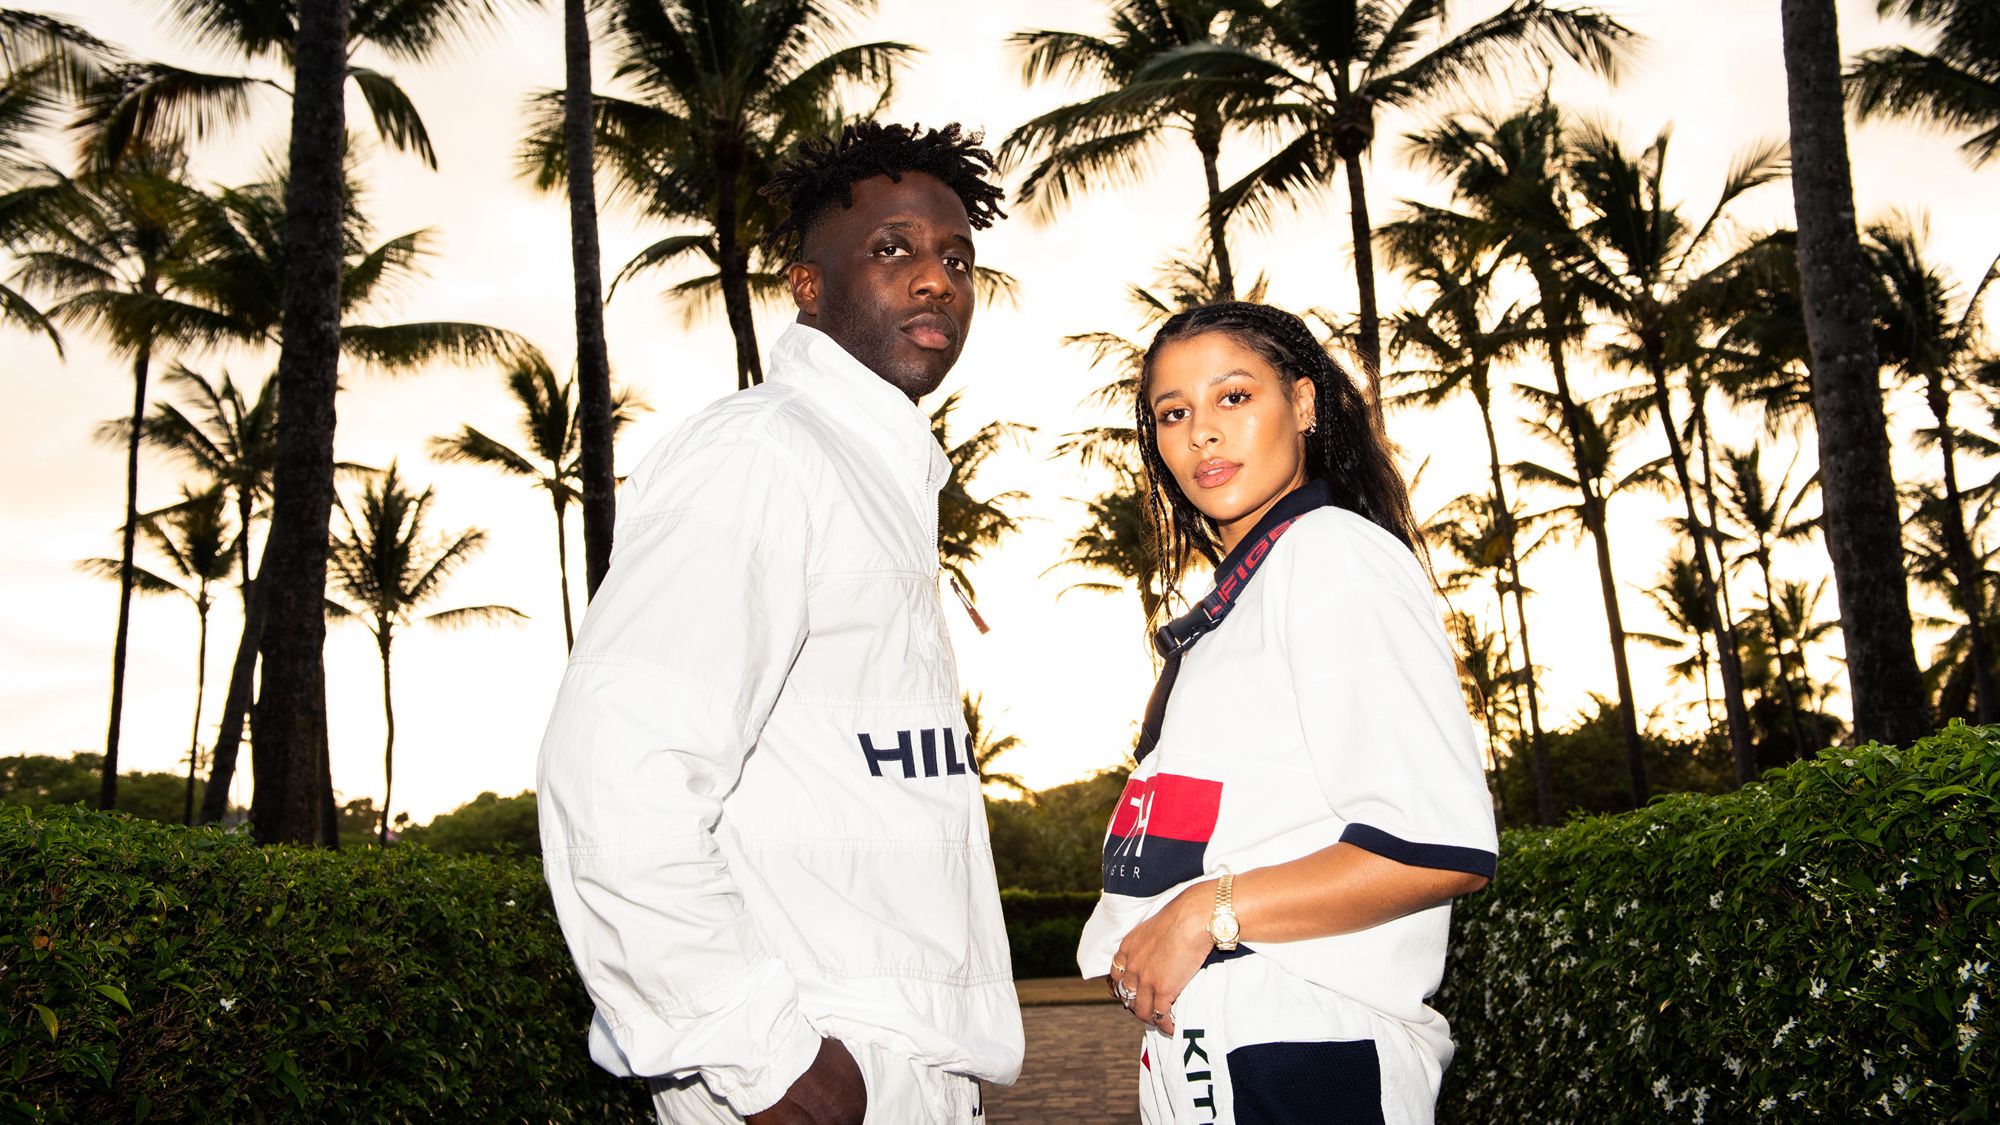 kith and tommy hilfiger collab